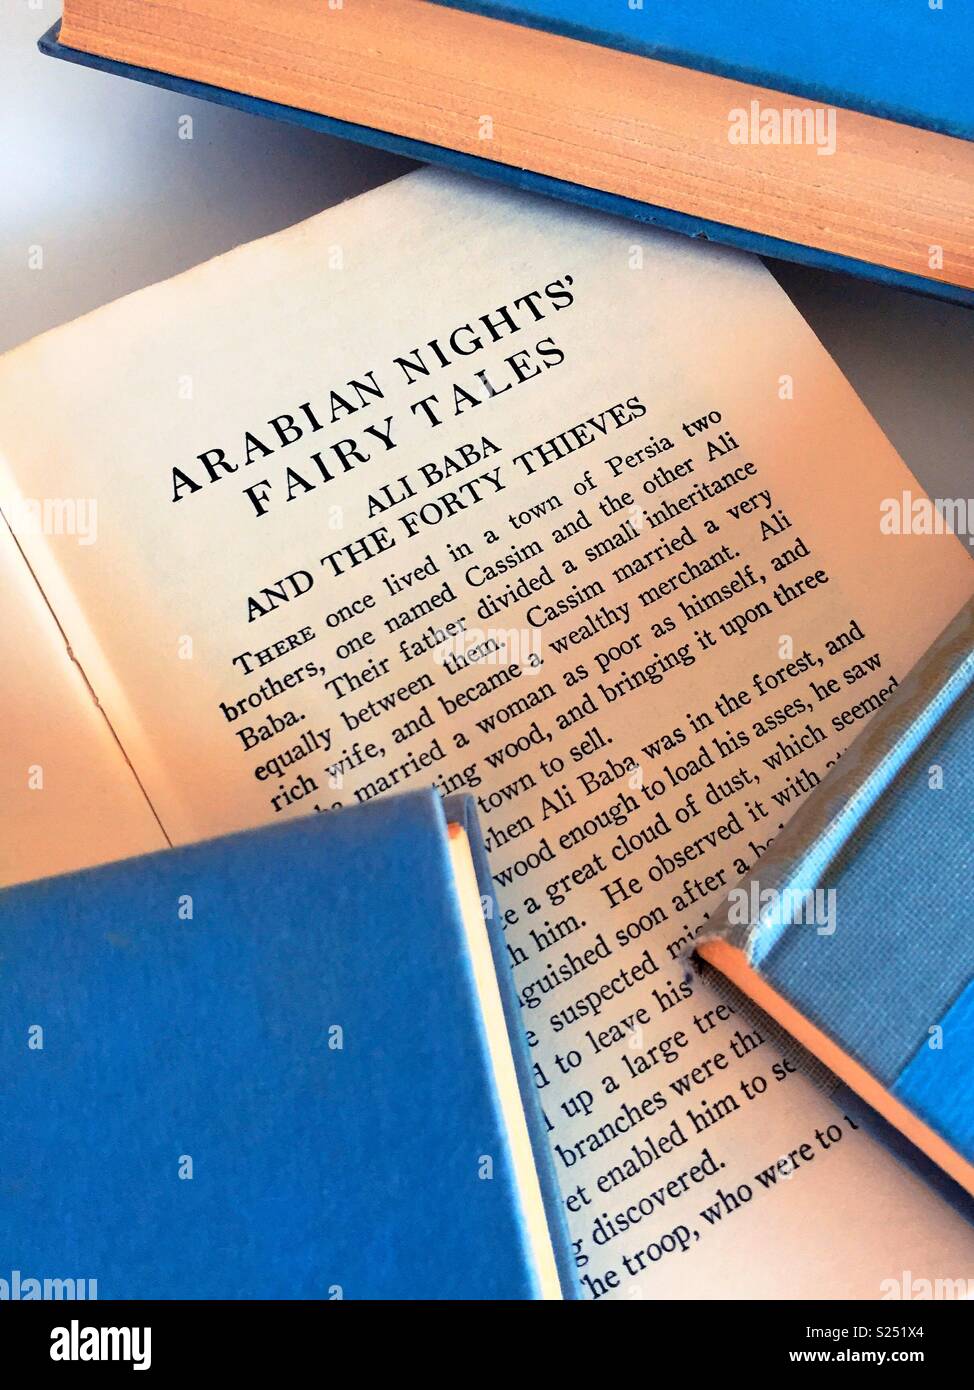 Close up of Arabian nights book open with other hardbound books, United States. Stock Photo